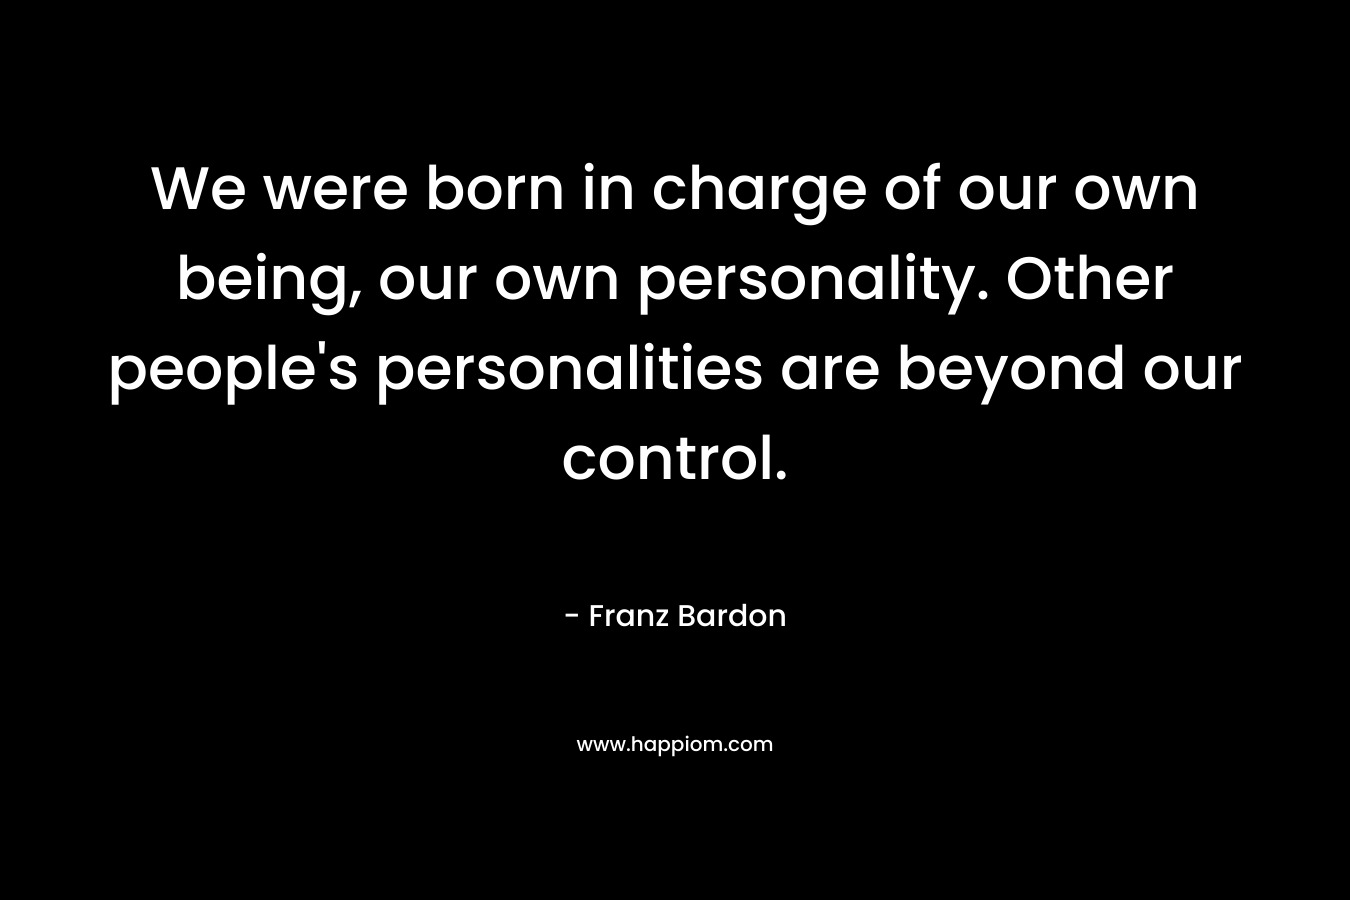 We were born in charge of our own being, our own personality. Other people's personalities are beyond our control.